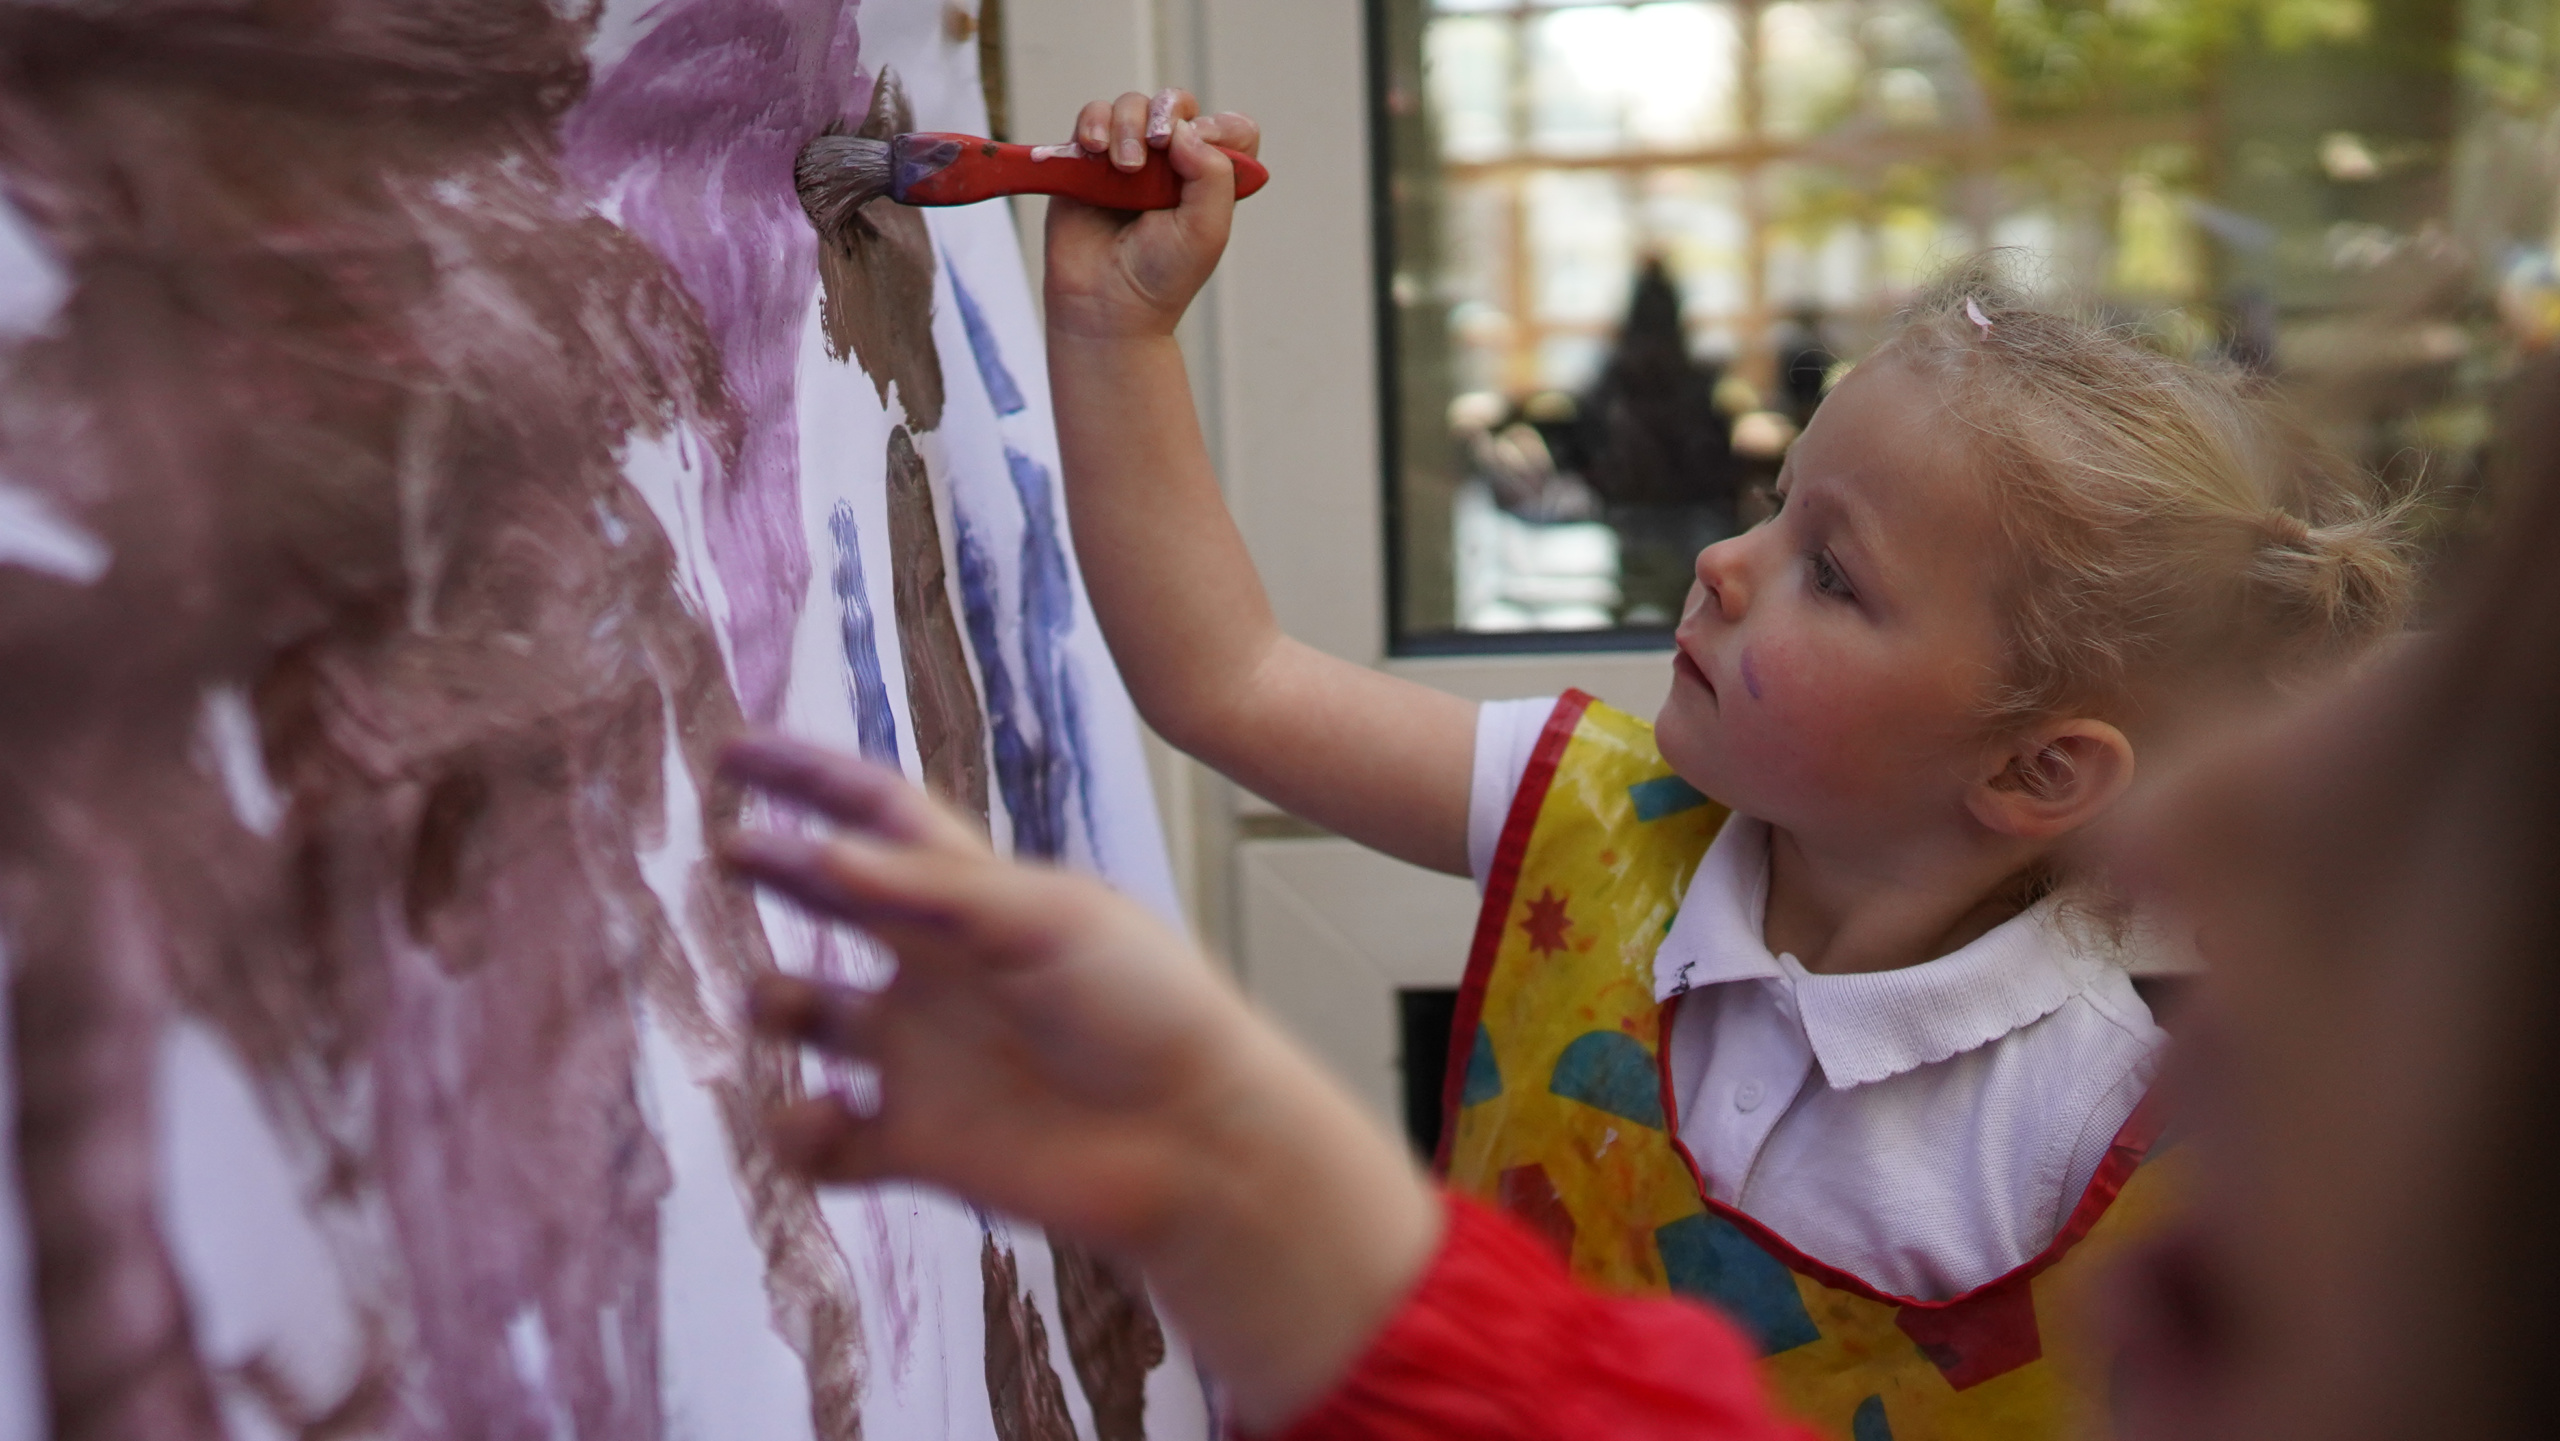 A young girl can be seen painting on a large sheet of paper on the wall with a paintbrush, whilst wearing an art apron.